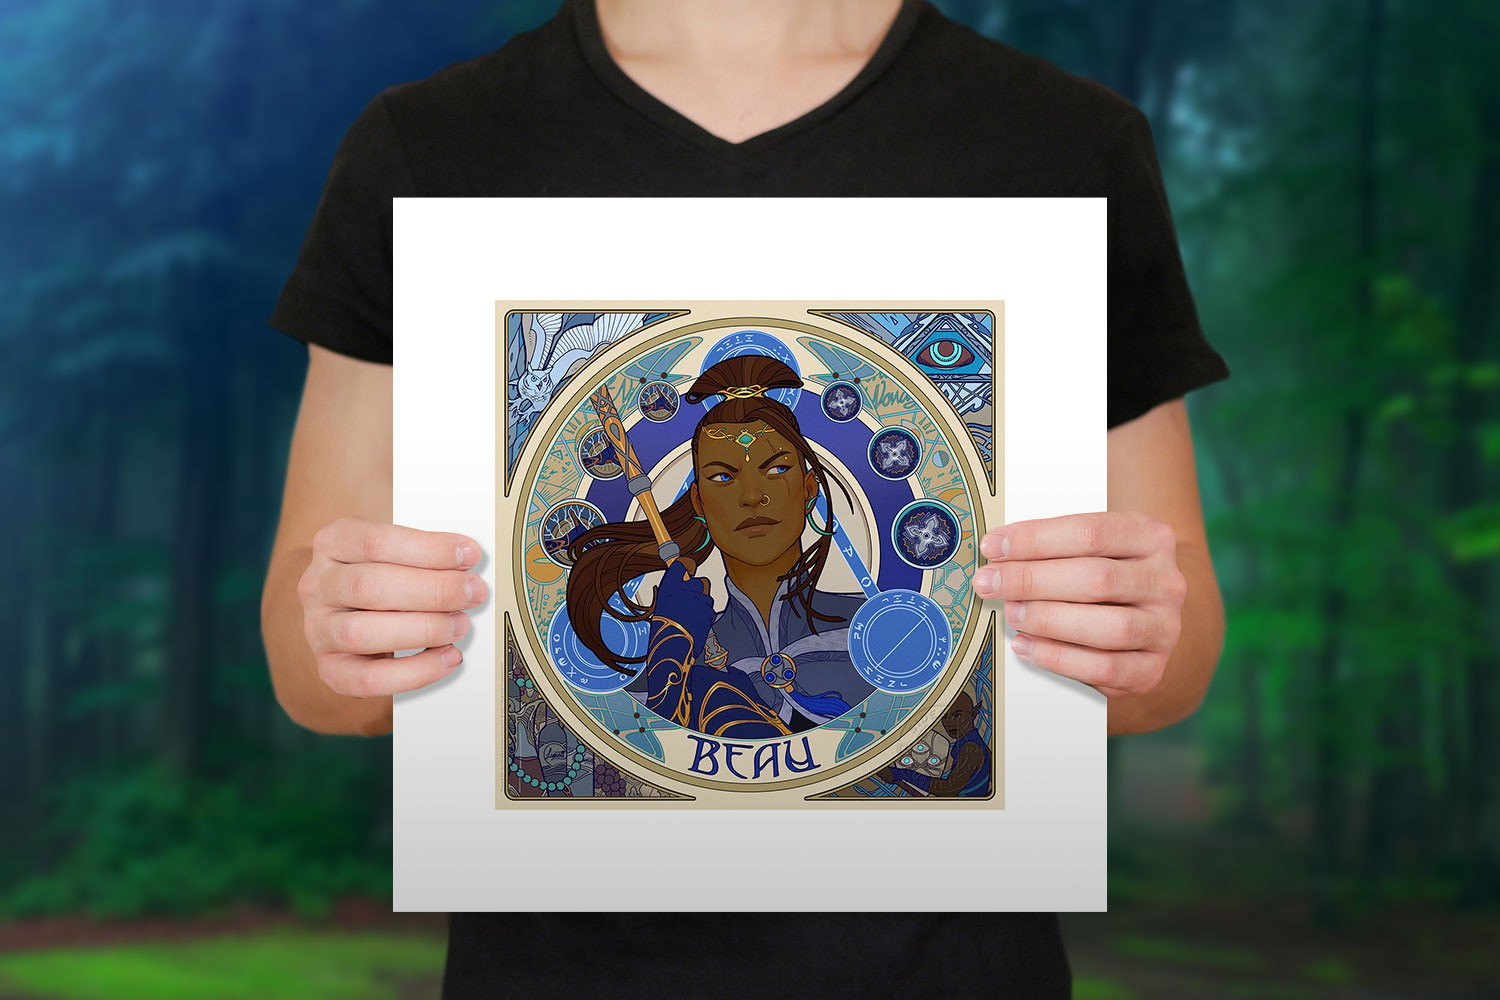 Mighty Nein Portrait Series: Beau Exclusive Edition 